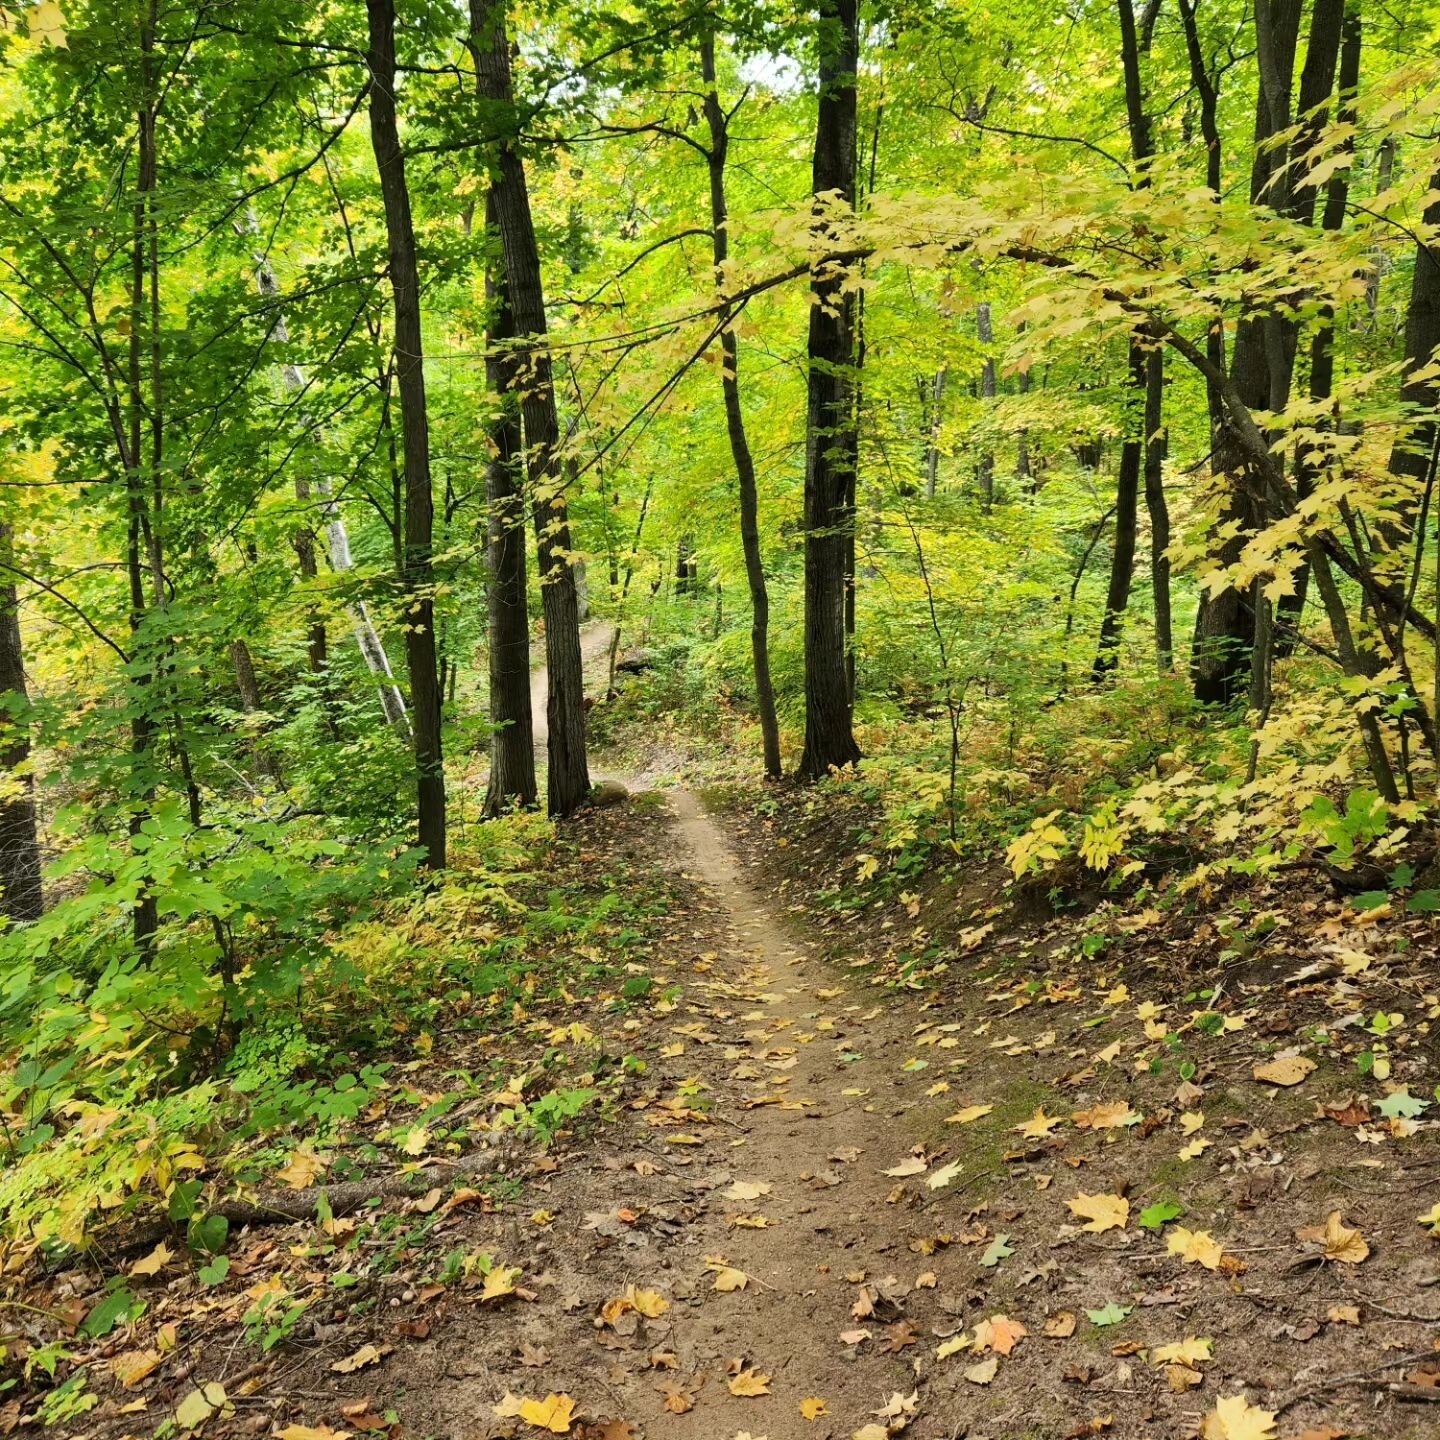 I finally visited Cayuna, MN, to sample the trails a few weeks ago: fun, flowy trails for the whole family and beautiful scenery! It's pretty remarkable what they have built with minimal elevation gain and how the trails have resurrected the surround